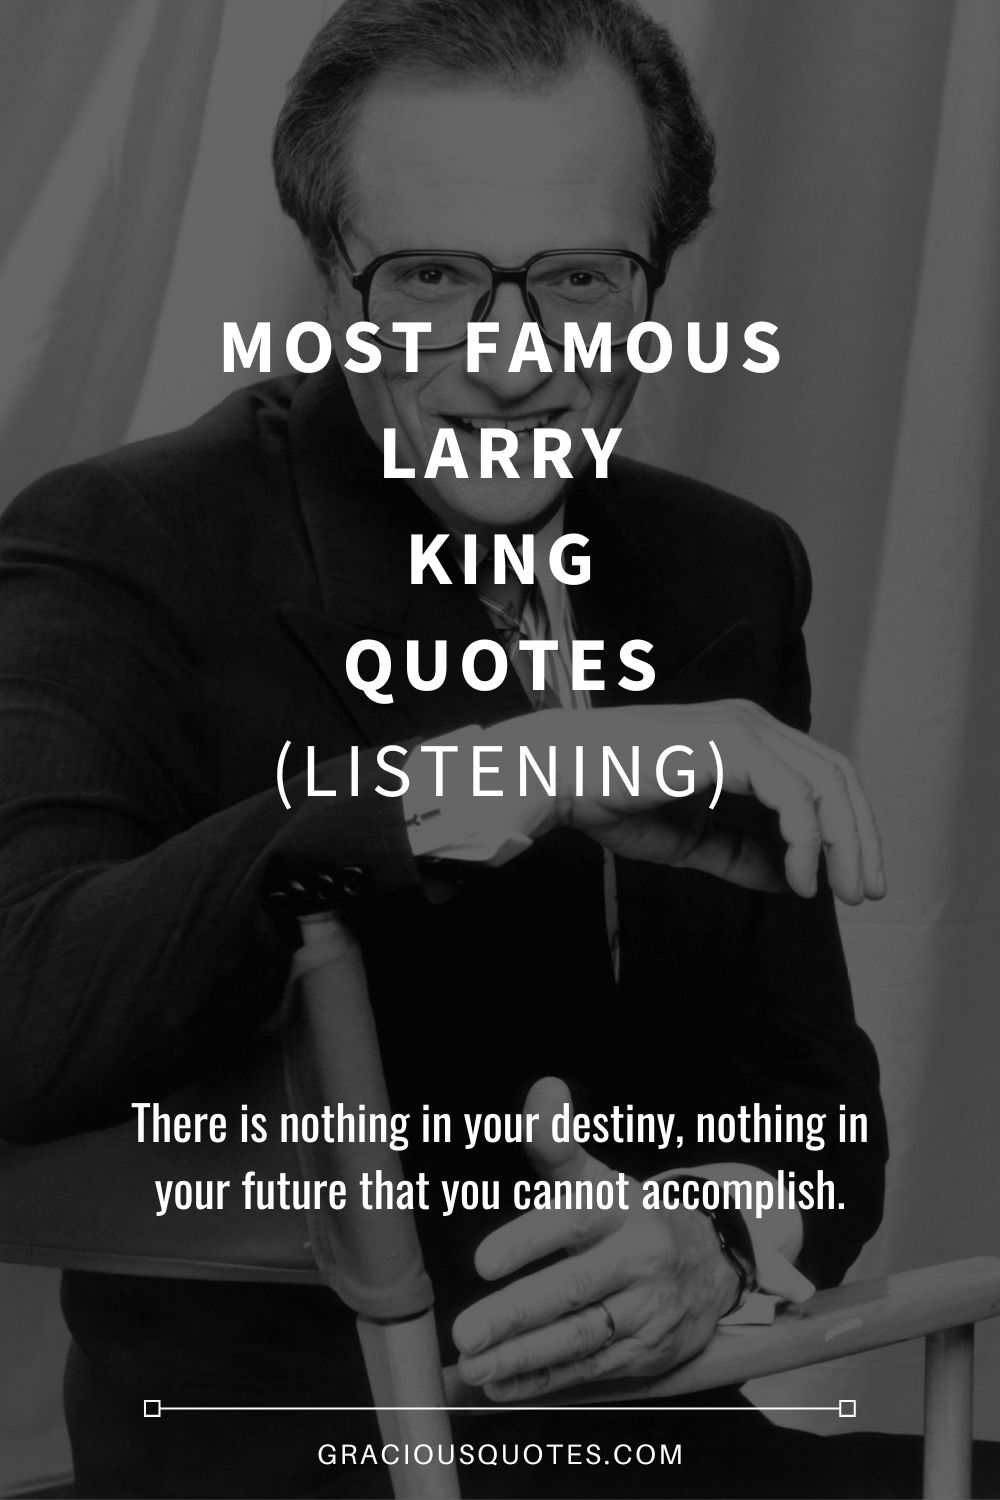 Most Famous Larry King Quotes (LISTENING) - Gracious Quotes